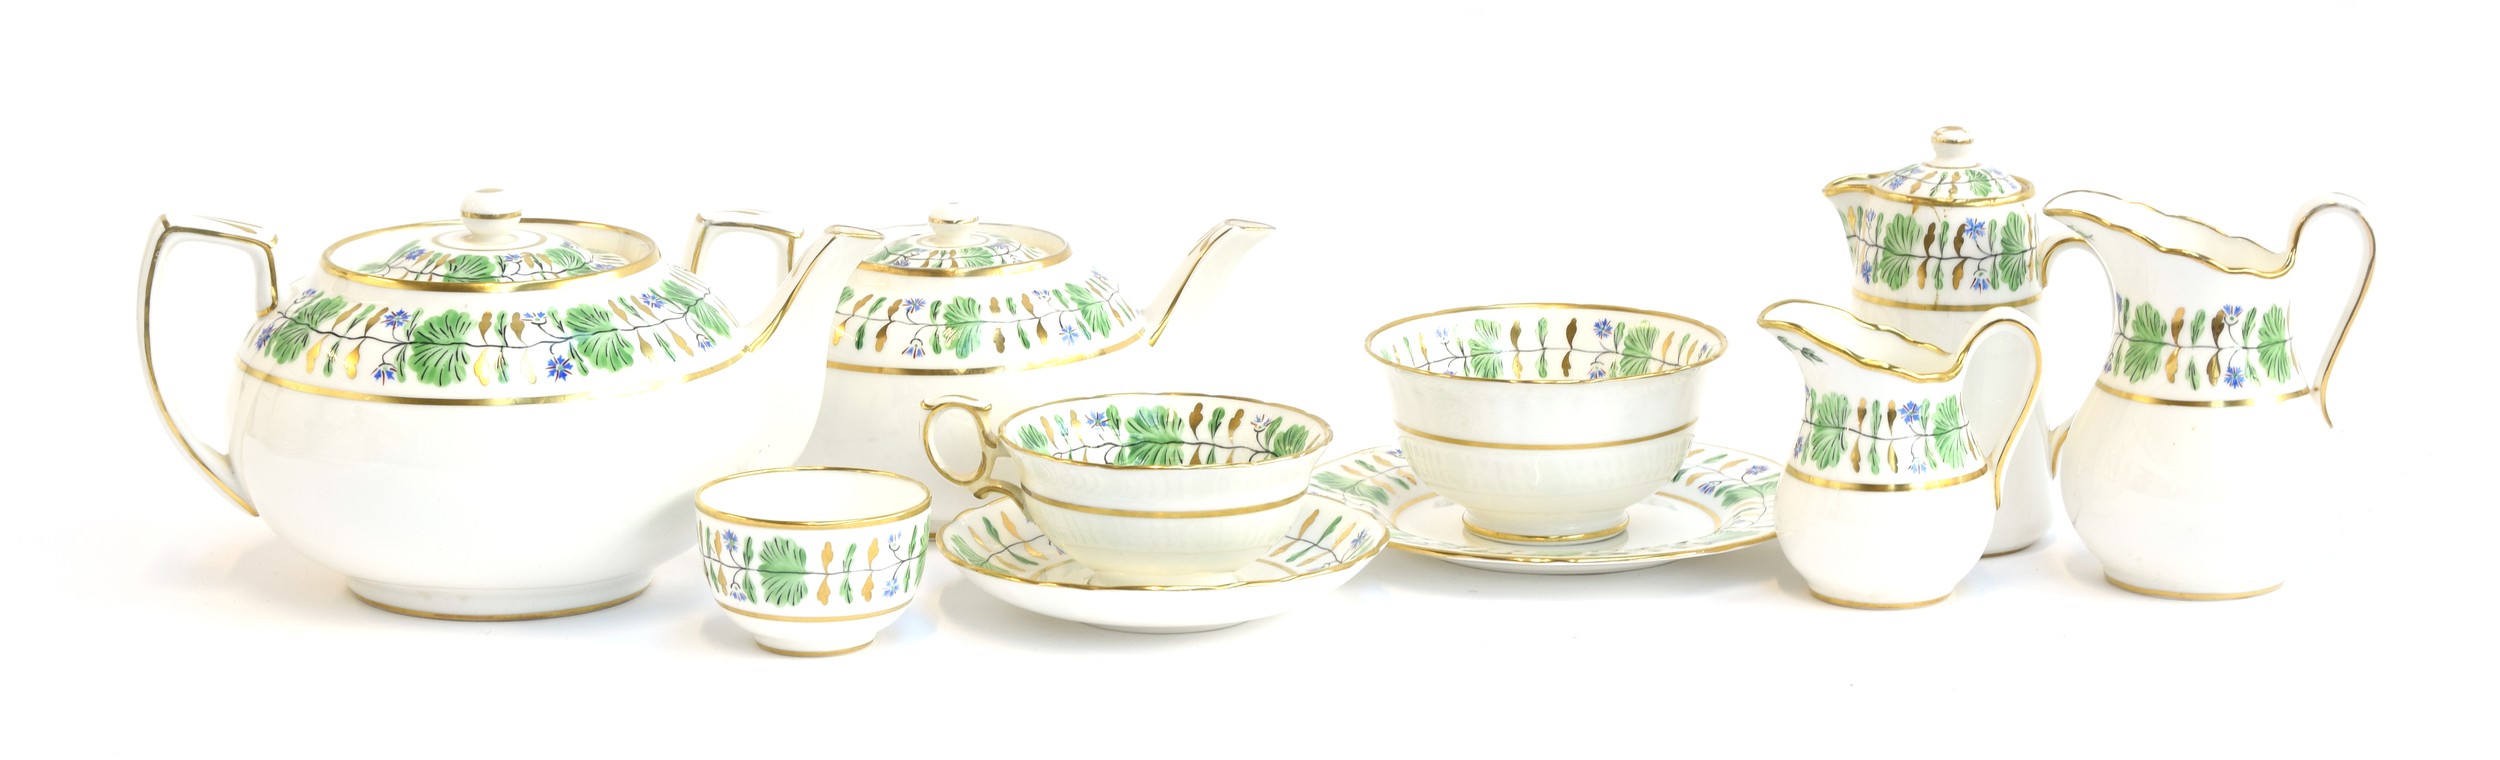 An early 20th century 'Palmetto' tea service by Hammersley & Co for T. Goode & Co London, comprising